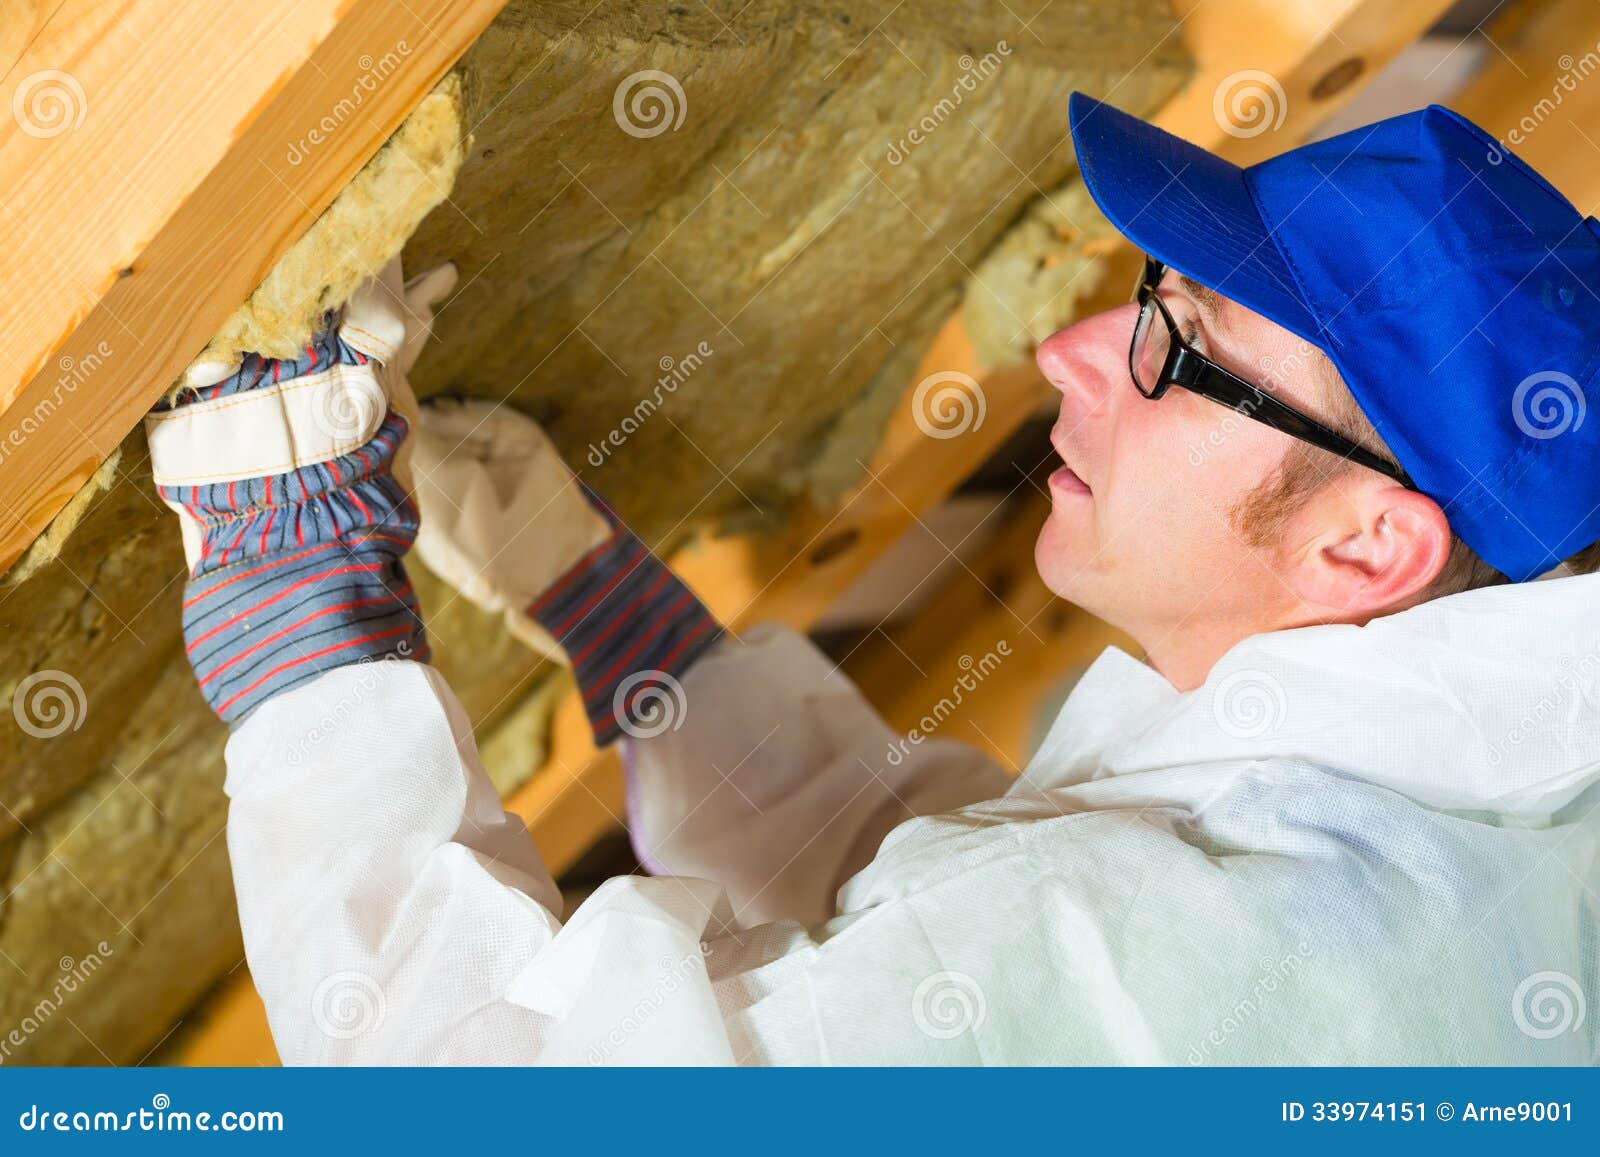 worker setting thermal insulating material